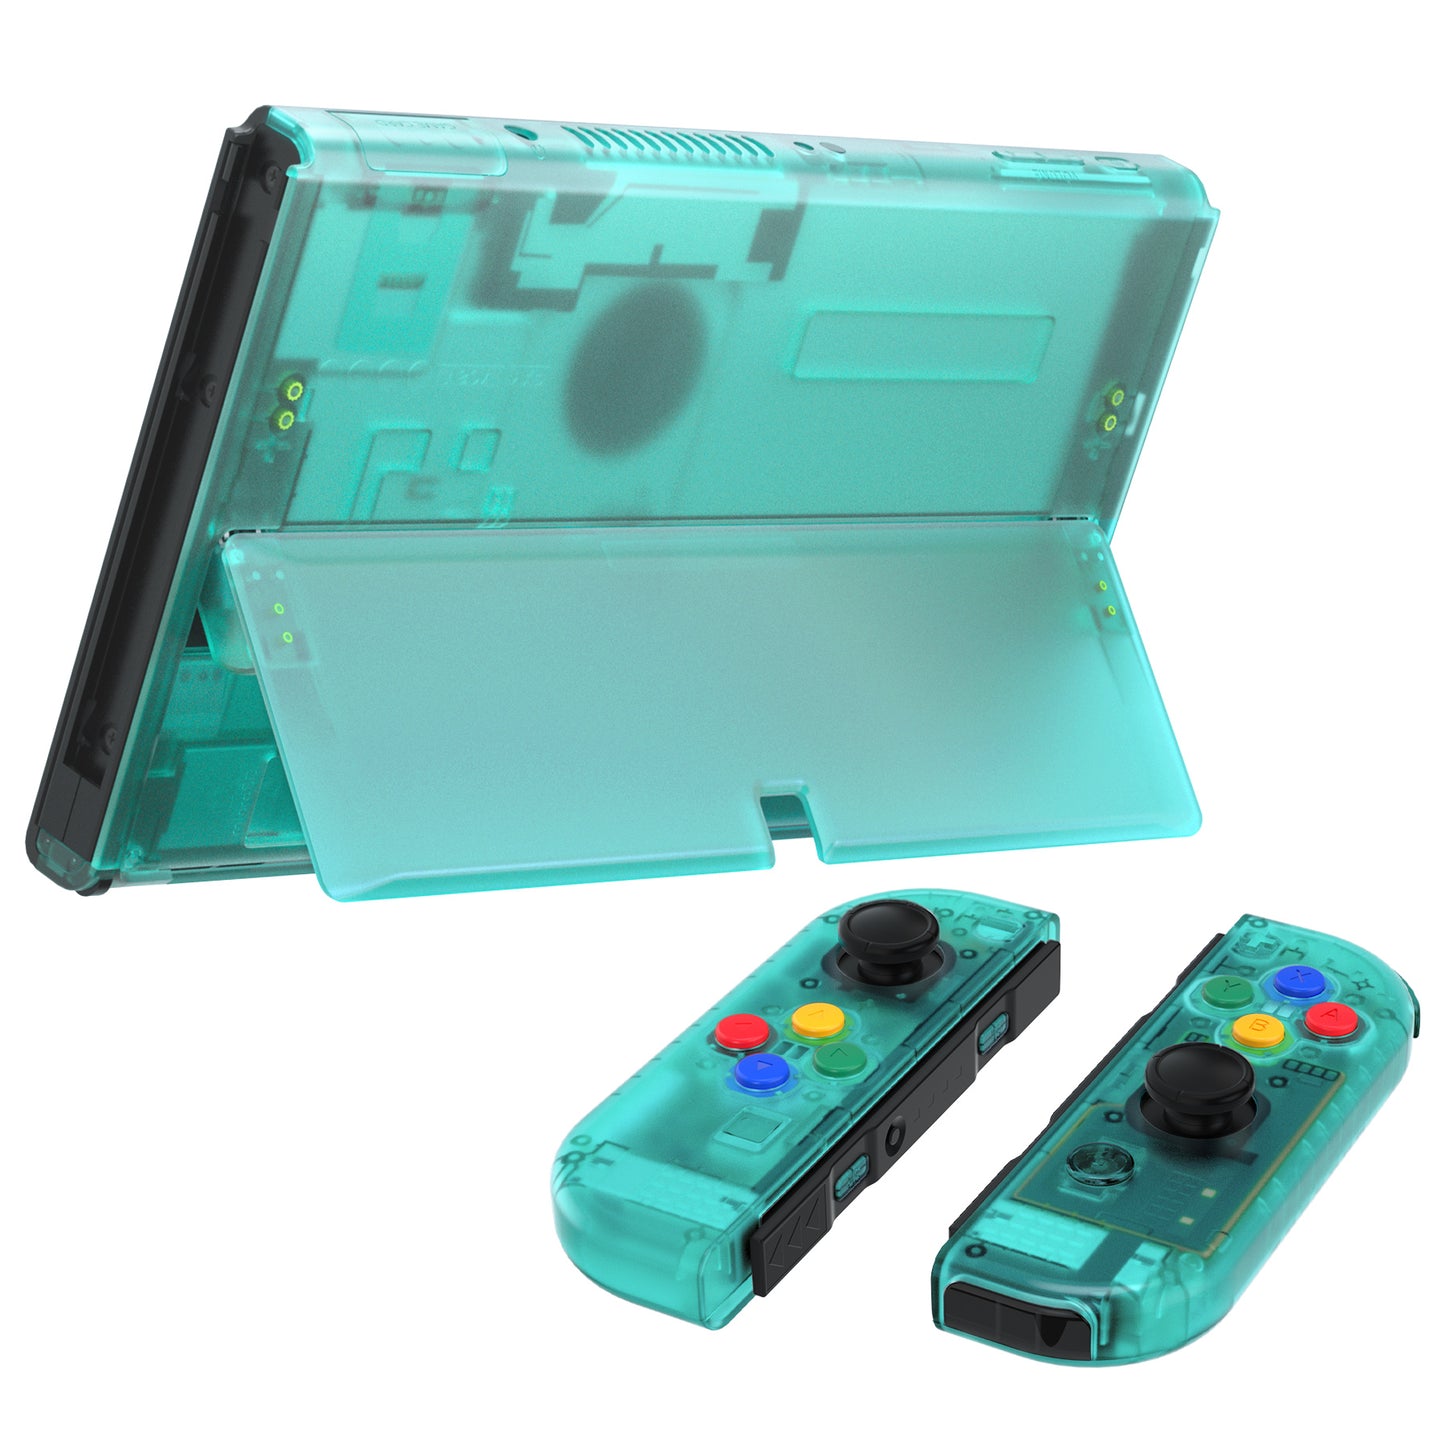 eXtremeRate Retail Emerald Green Custom Full Set Shell for Nintendo Switch OLED, DIY Replacement Console Back Plate & Kickstand, NS Joycon Handheld Controller Housing with Colorful Buttons for Nintendo Switch OLED - QNSOM5007